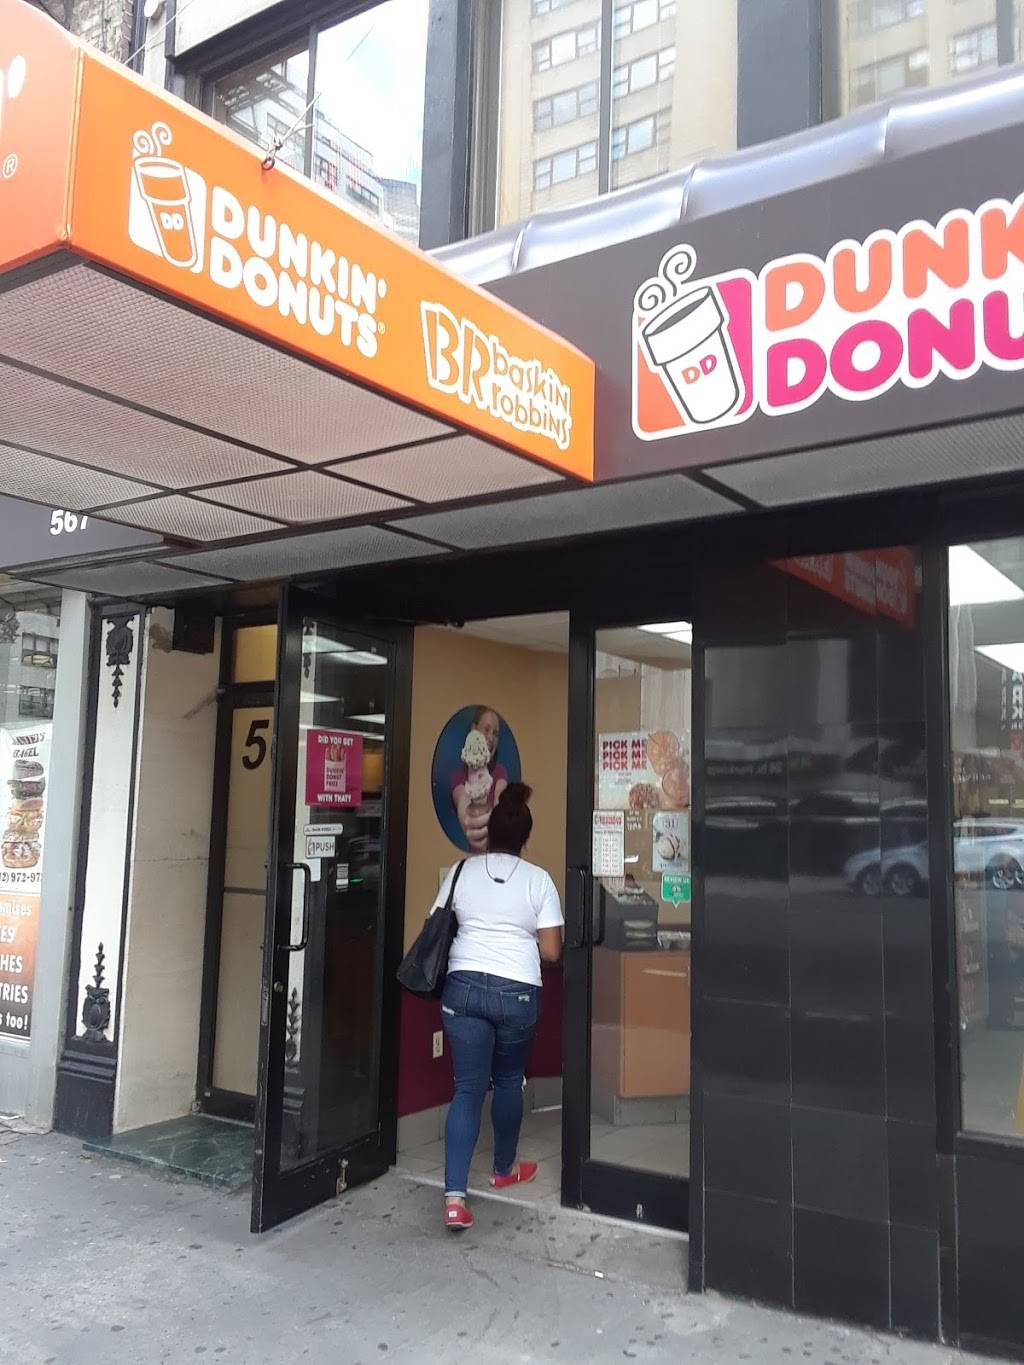 Dunkin Donuts | cafe | 567 3rd Ave, New York, NY 10016, USA | 2128679578 OR +1 212-867-9578